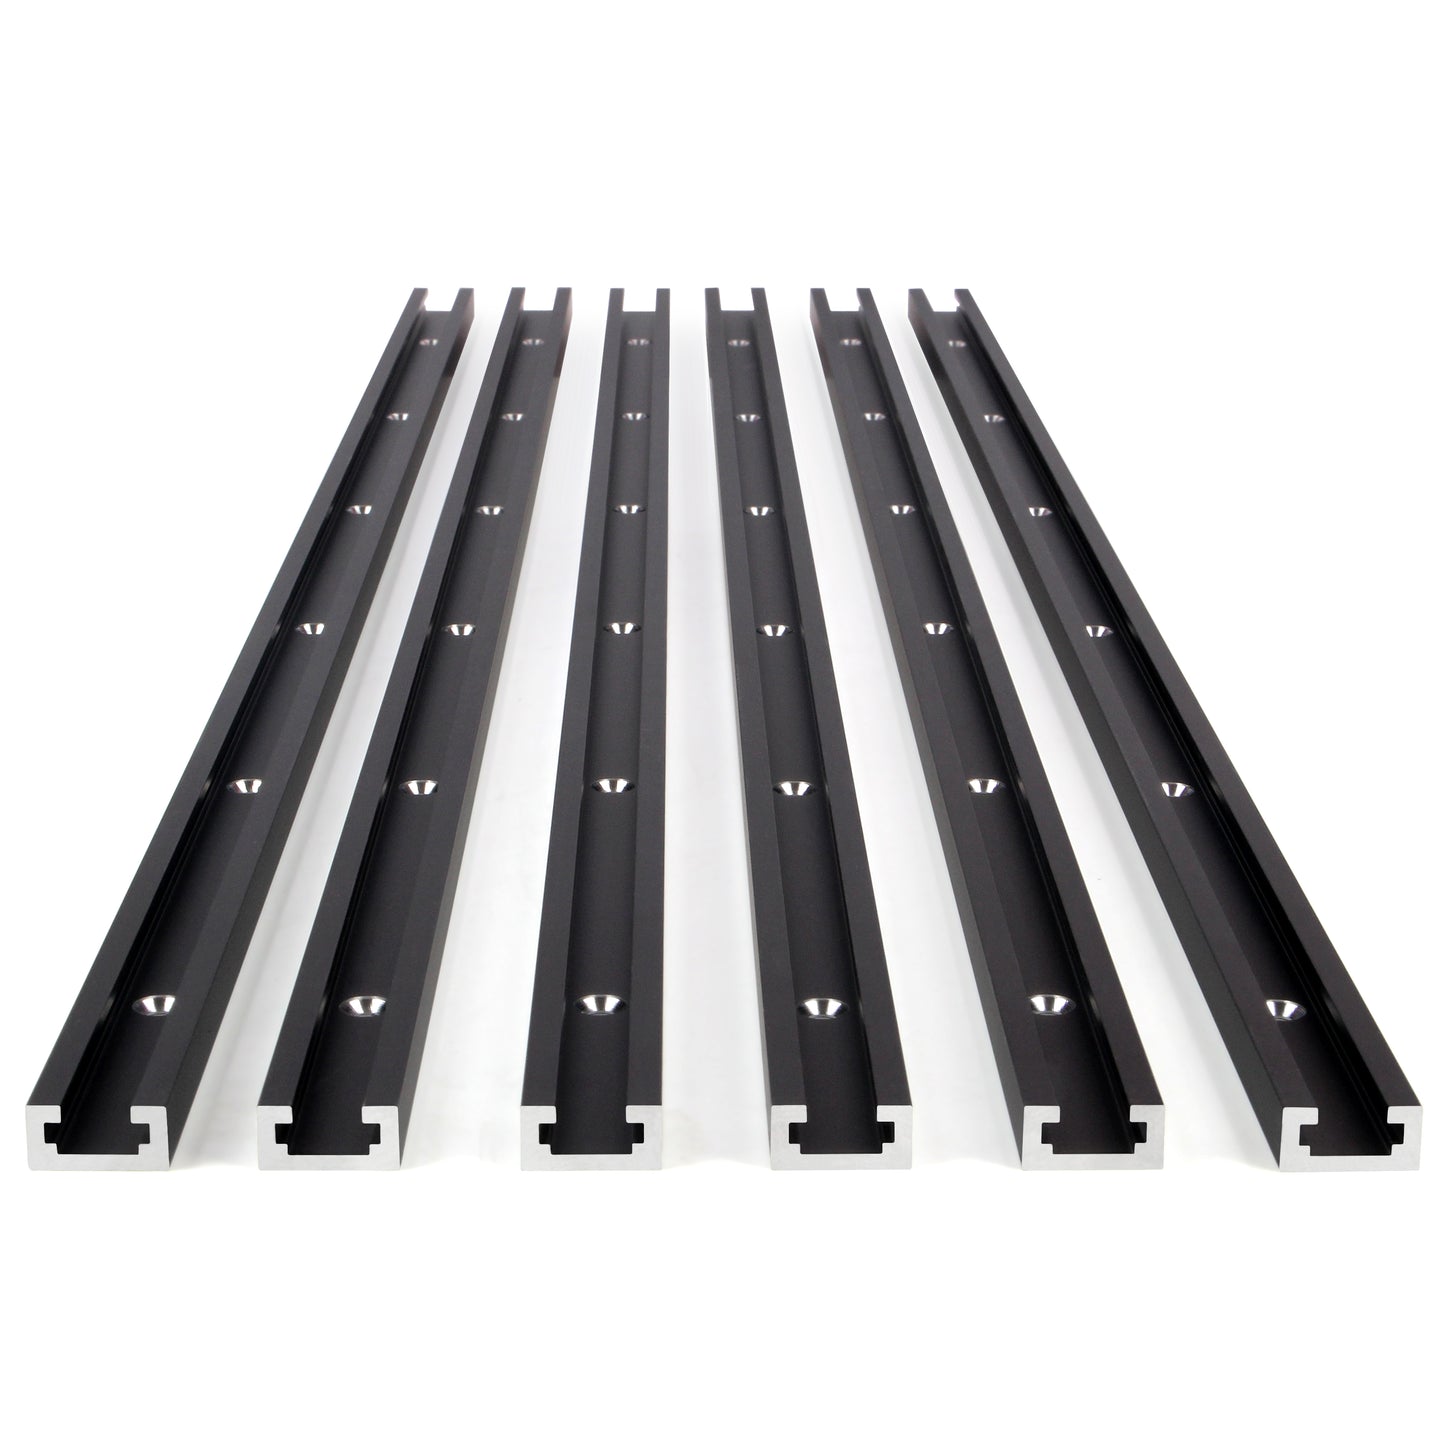 T Tracks 48 Inches 6 Pack for Woodworking By CLEAR STYLE, Double-Cut Jig Profile Universal T-Tracks with Predrilled Mounting Holes